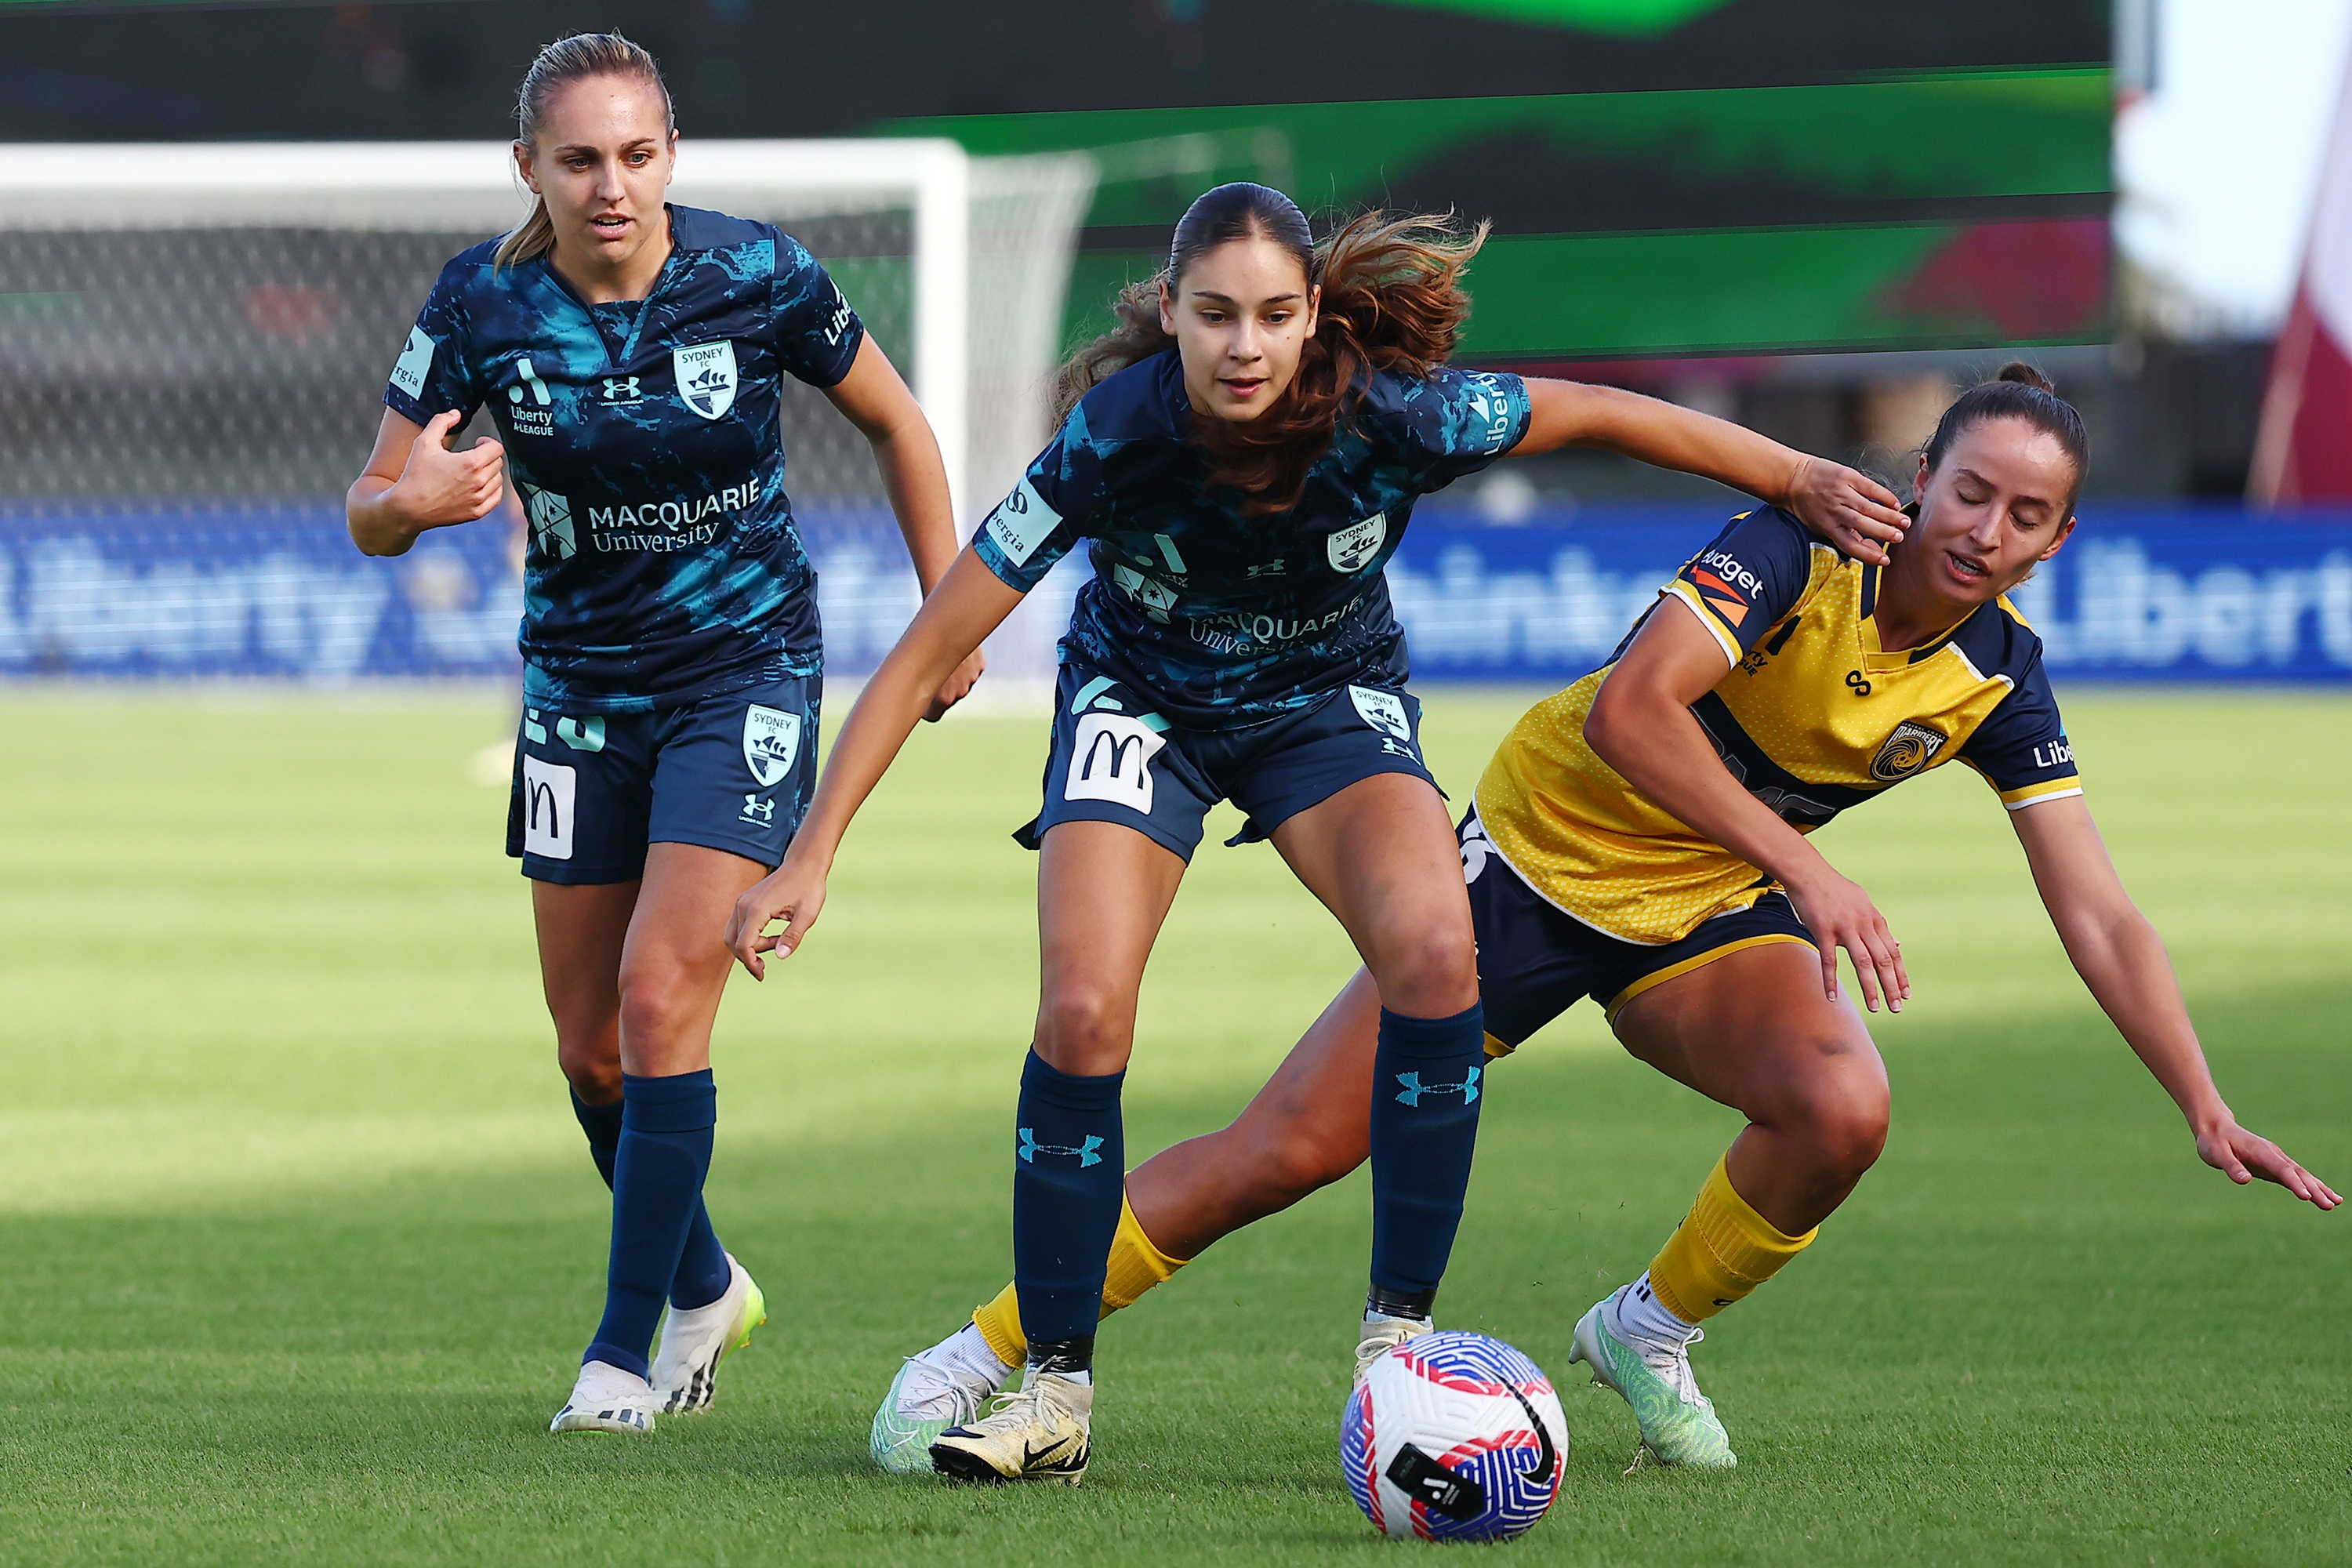 Indiana Dos Santos of Sydney FC and Bianca Galic of the Mariners challenge for the ball.